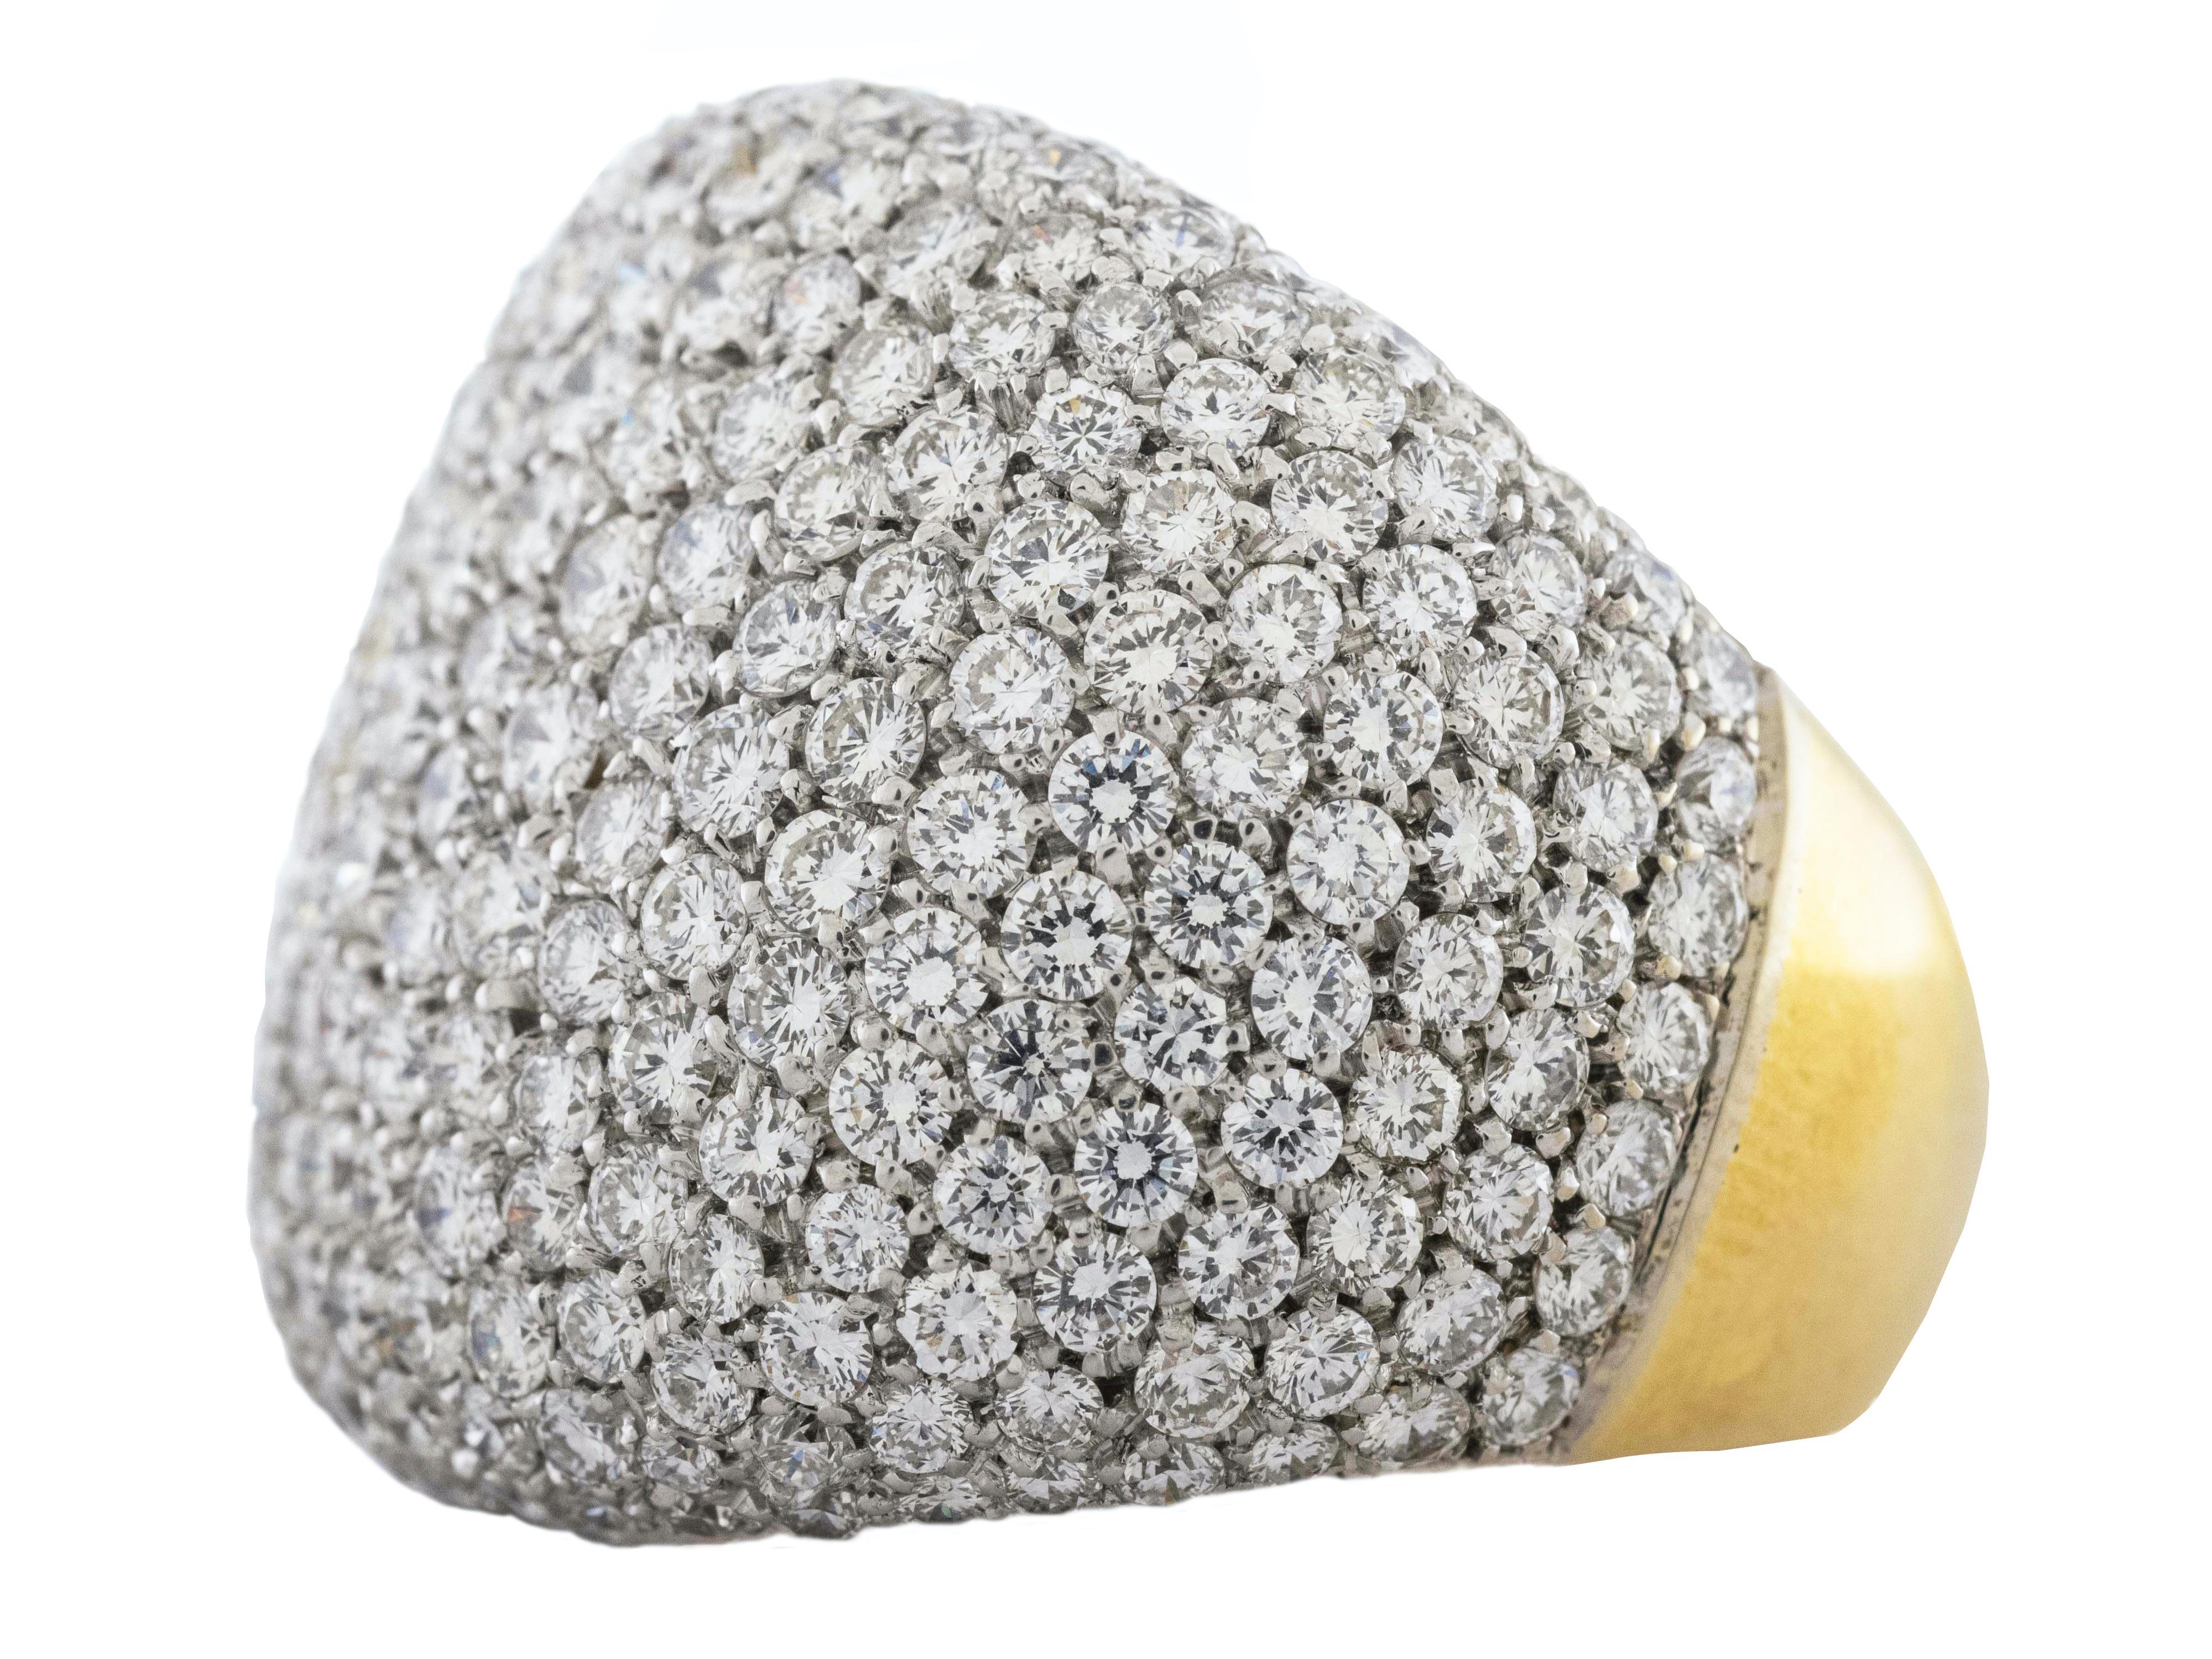 A very fine Diamond pave for ct 6.08
The pave is set on white gold
Made in 18 Karat yellow and white gold for gr 17.65
This ring has a funny Diamonds LOVE inscription on it's inside.
Made in Germany by WEMPE
Size 6,5
This ring can be resize a little.